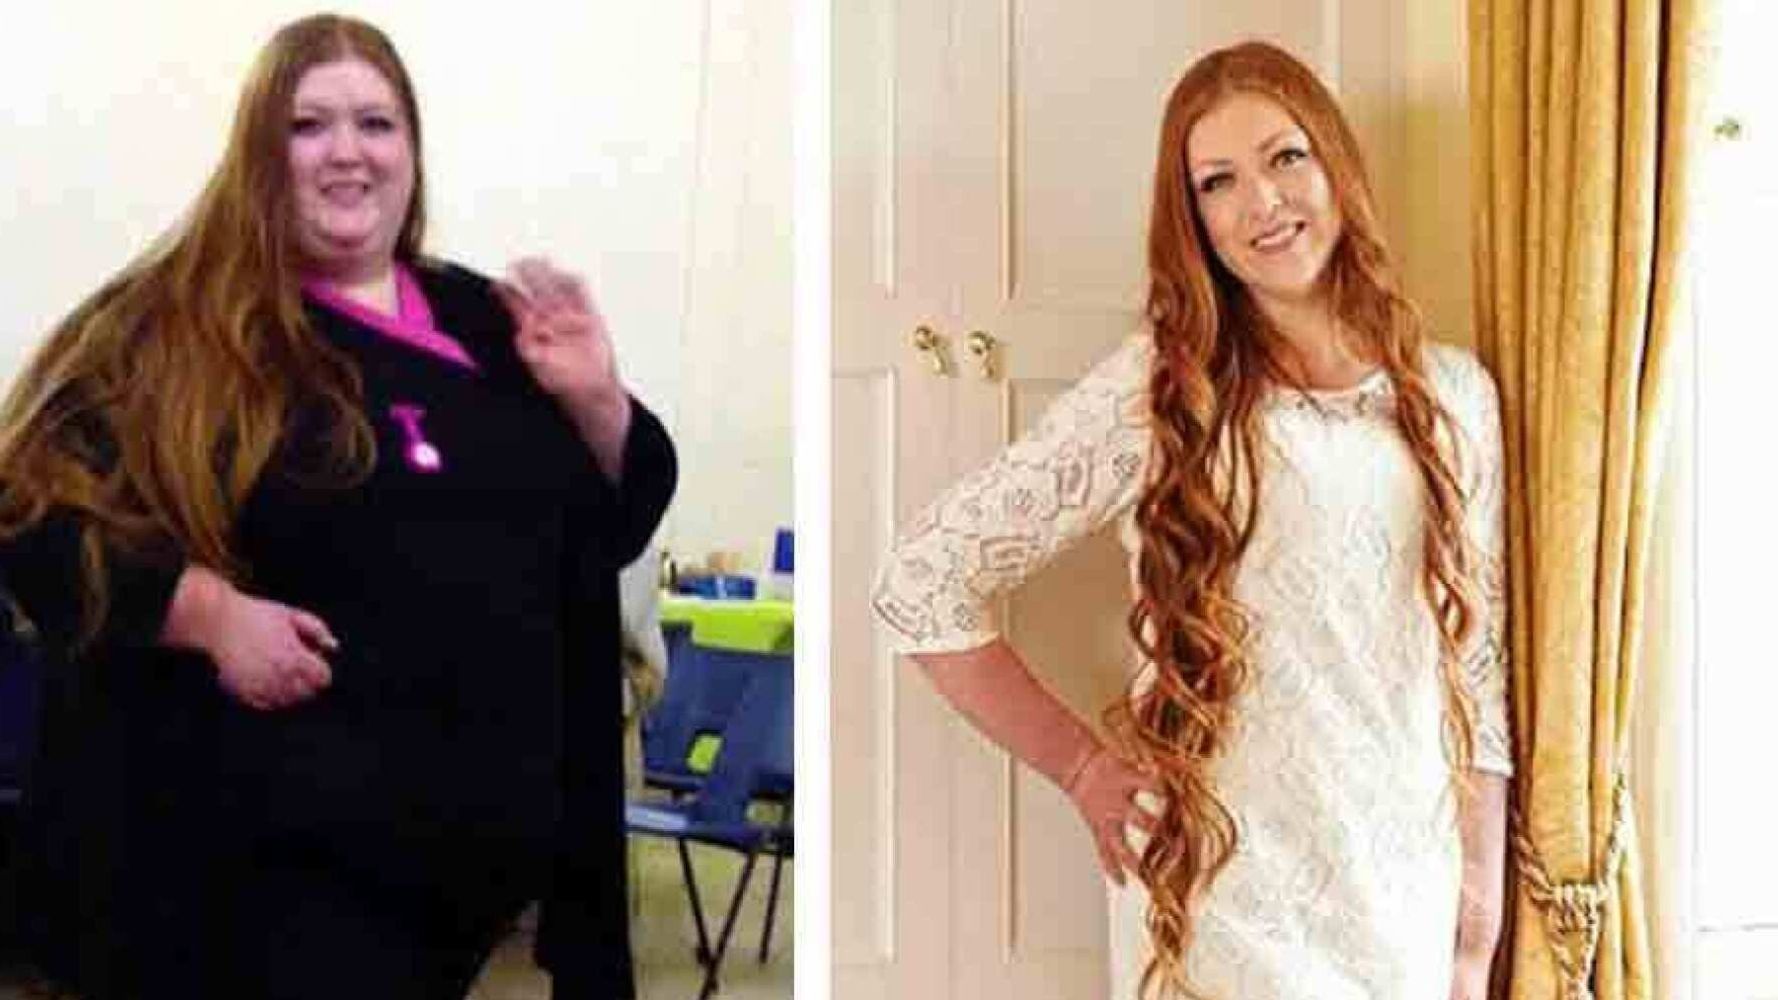 Size 20 woman loses five stones in 18 months after failing to find